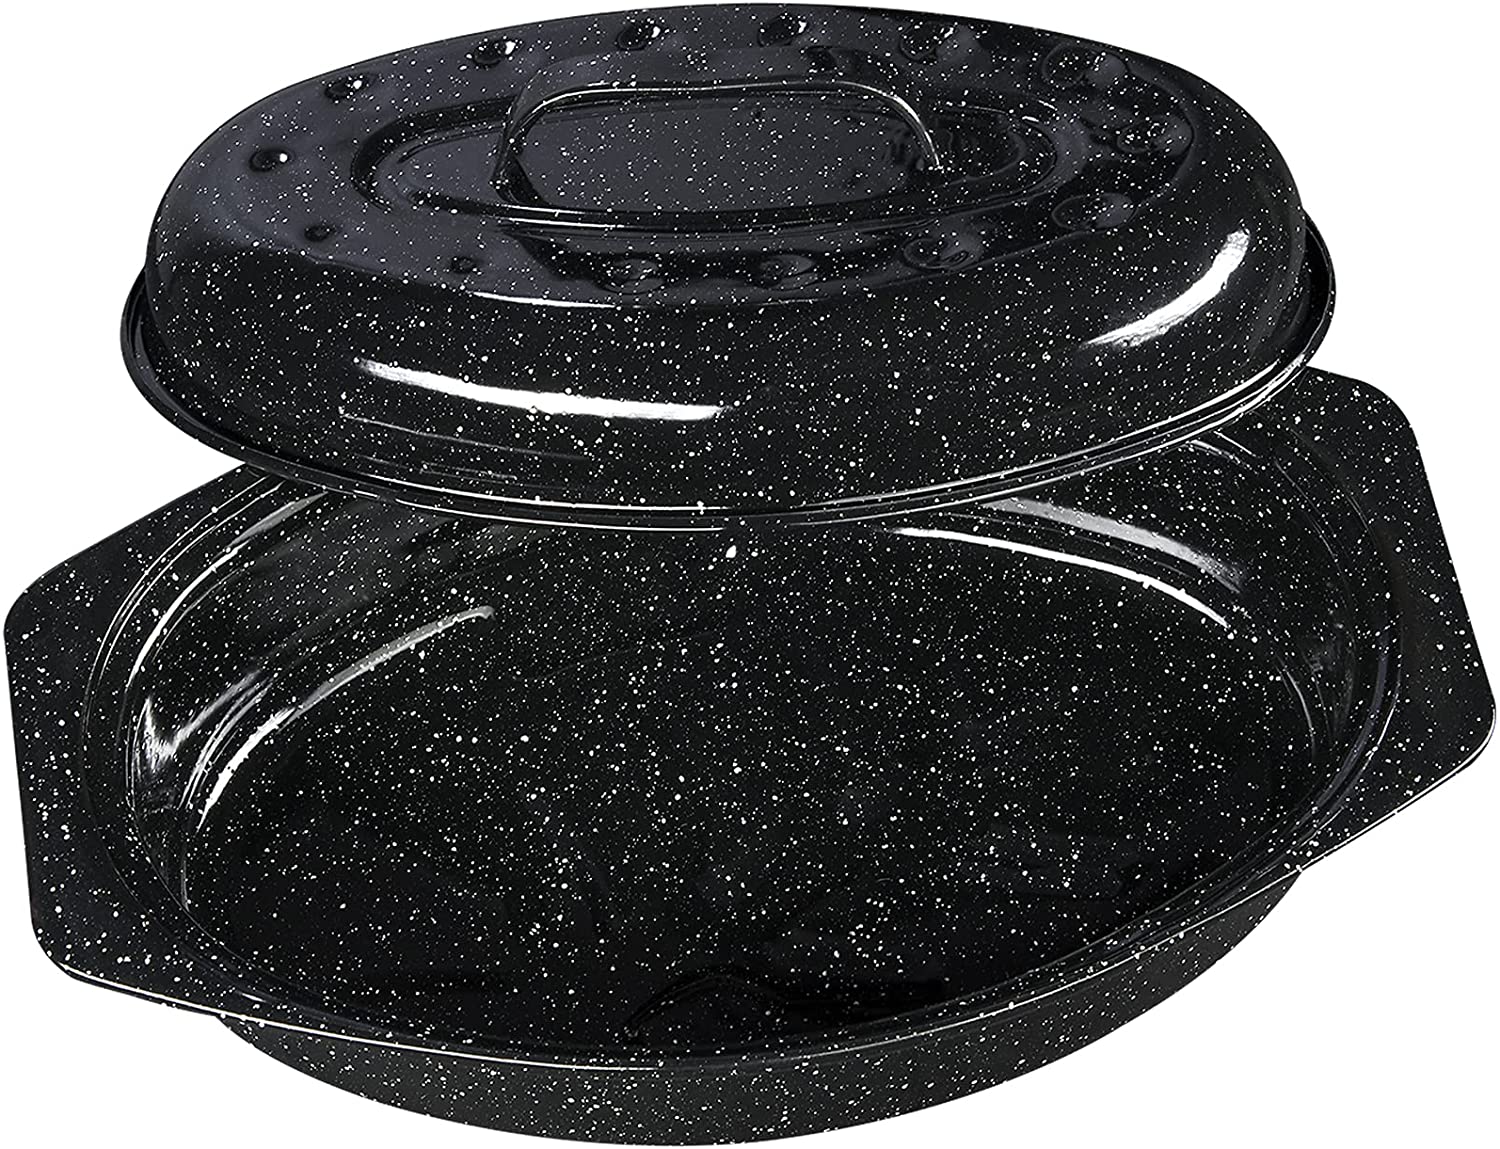 Granite Ware 13 inch oval roaster with Lid. Enameled steel design to accommodate up to 7 lb poultry/roast. Resists up to 932°F - image 2 of 7